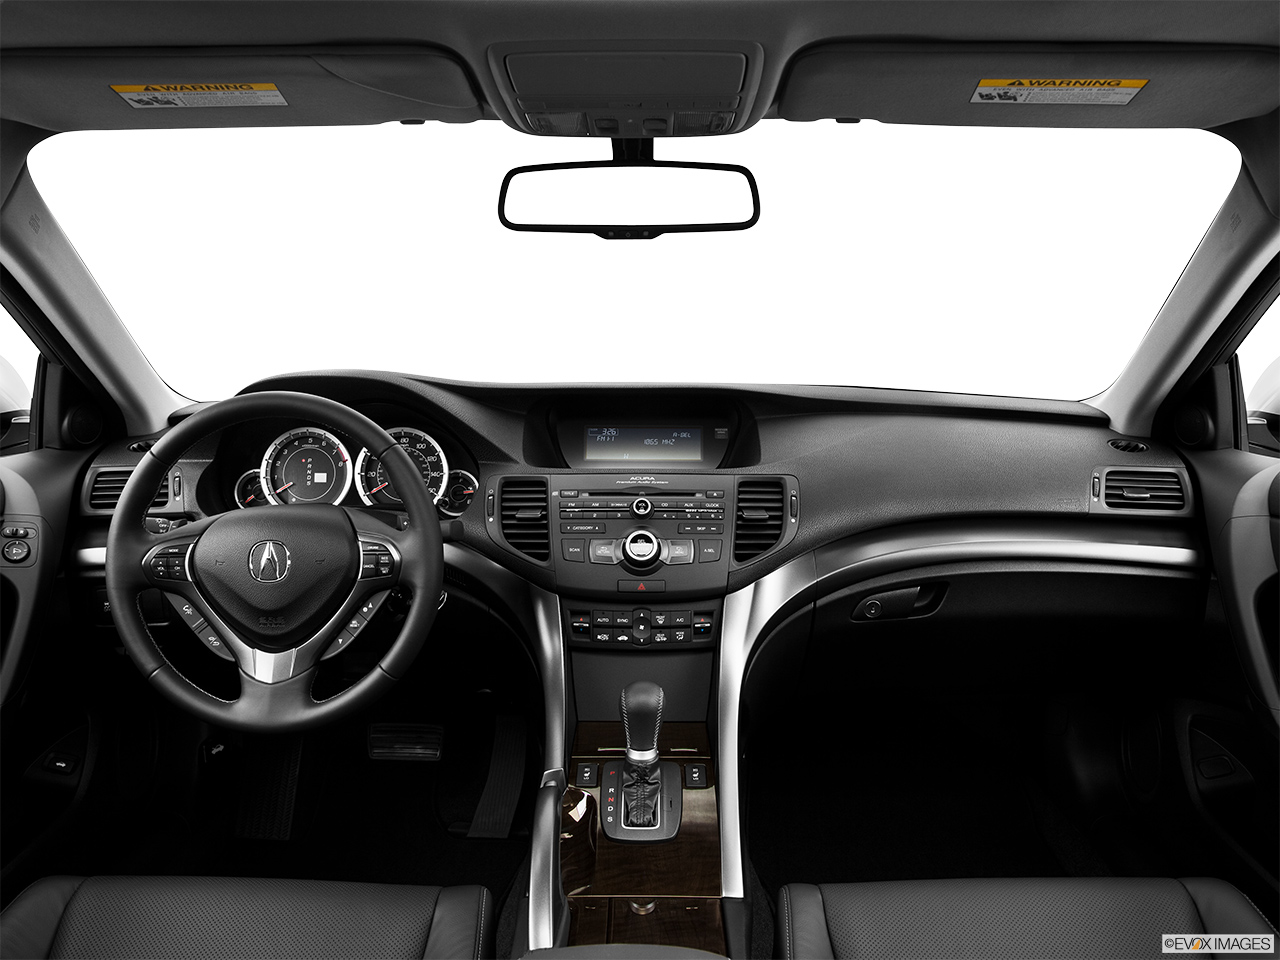 2013 Acura TSX 5-speed Automatic Centered wide dash shot 